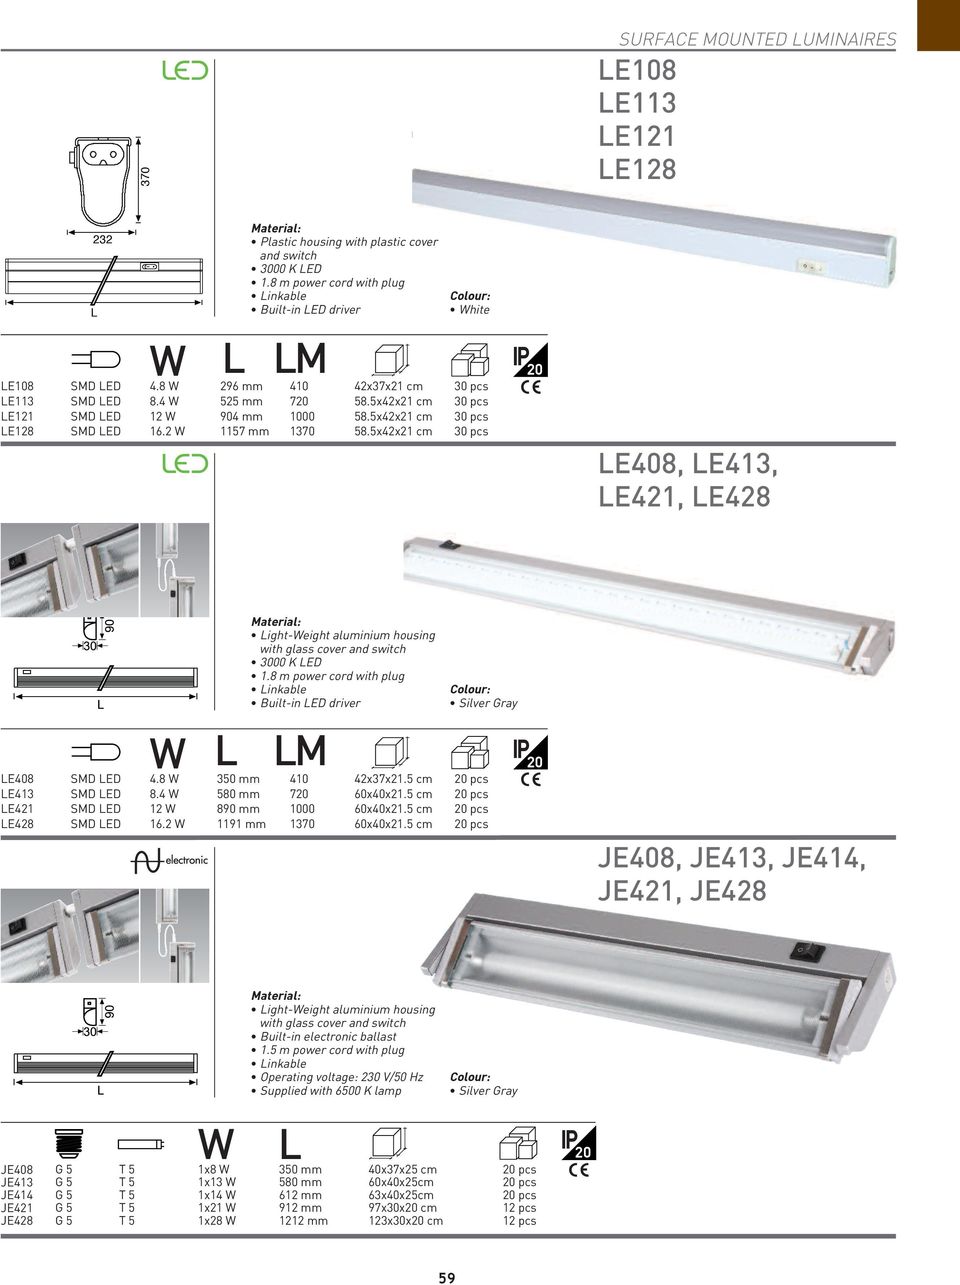 housing with plastic cover and switch 3000 K LED 1.8 m power cord with plug Linkable Built-in LED driver L LM hite SMD LED 4.8 296 mm 410 42x37x21 cm 30 pcs SMD LED 8.4 525 mm 720 58.